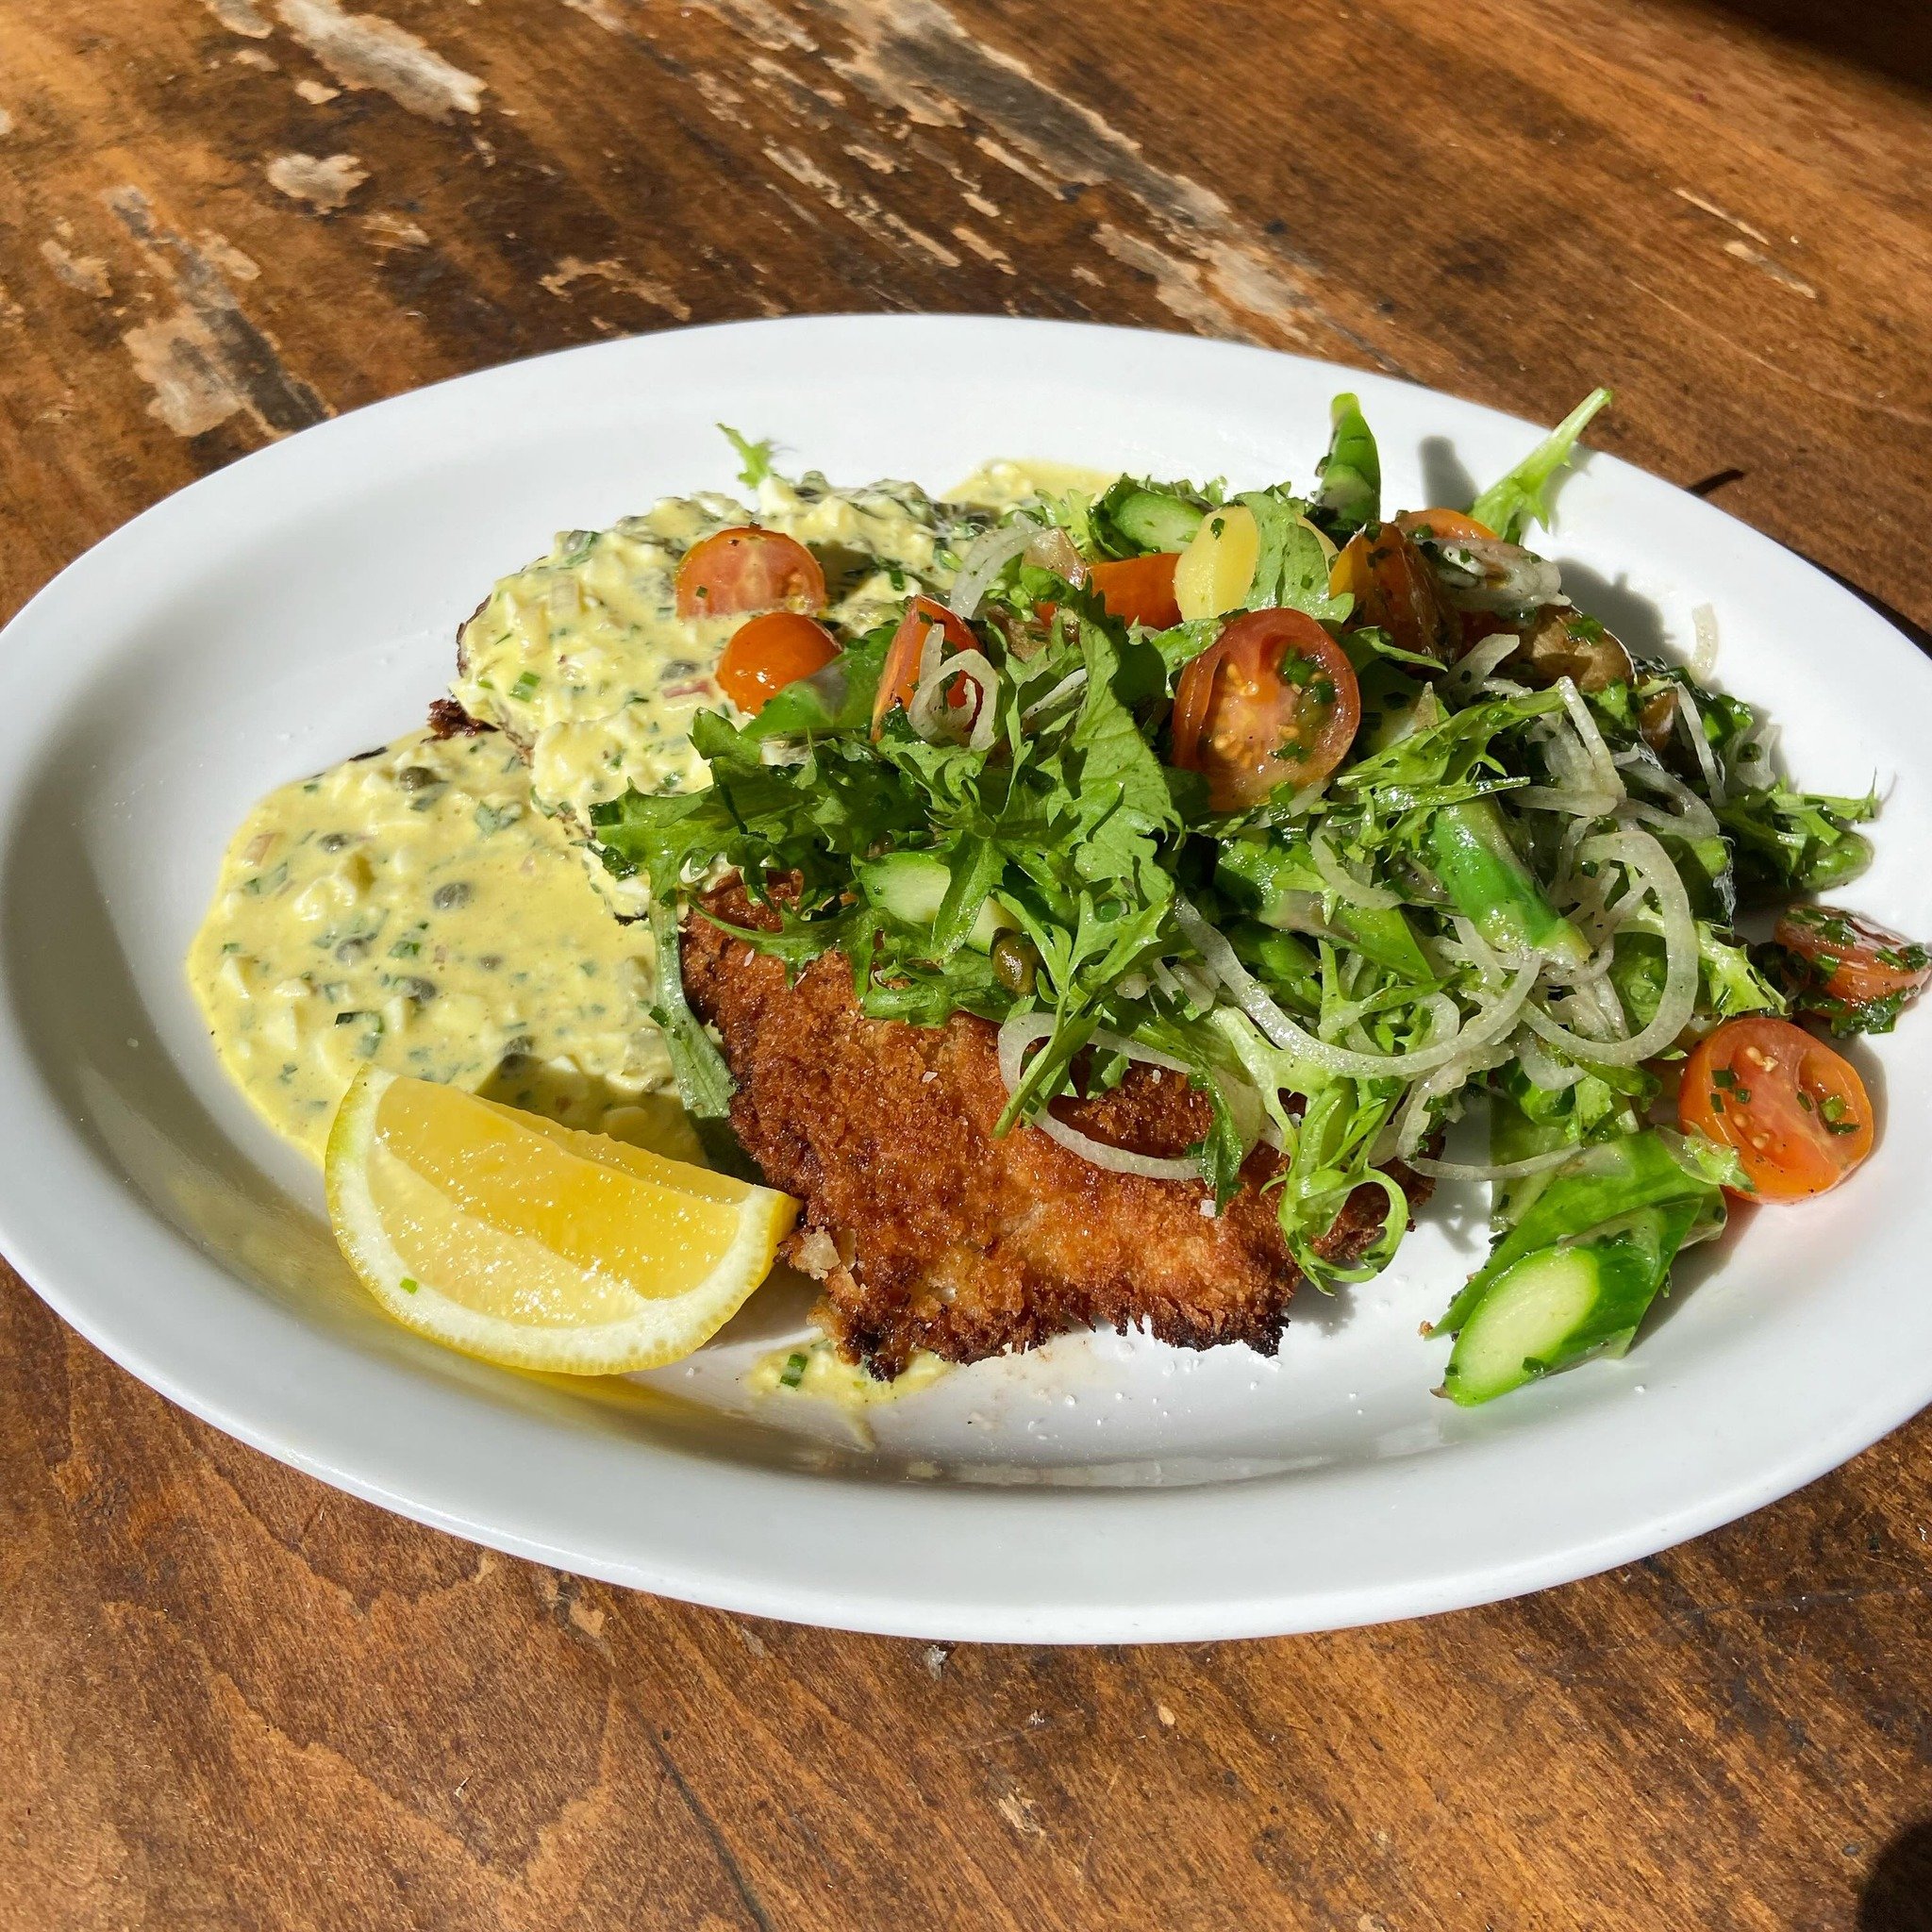 Tonight&rsquo;s Poisson du March&eacute;: Swordfish Milanese! Lightly breaded and pan-fried swordfish with sauce Gribiche, fingerling potatoes, asparagus, and herb salad!
#poissondujour #frenchfood #frenchcomfortfood #avleats #eatlocal #avlbouchon #a